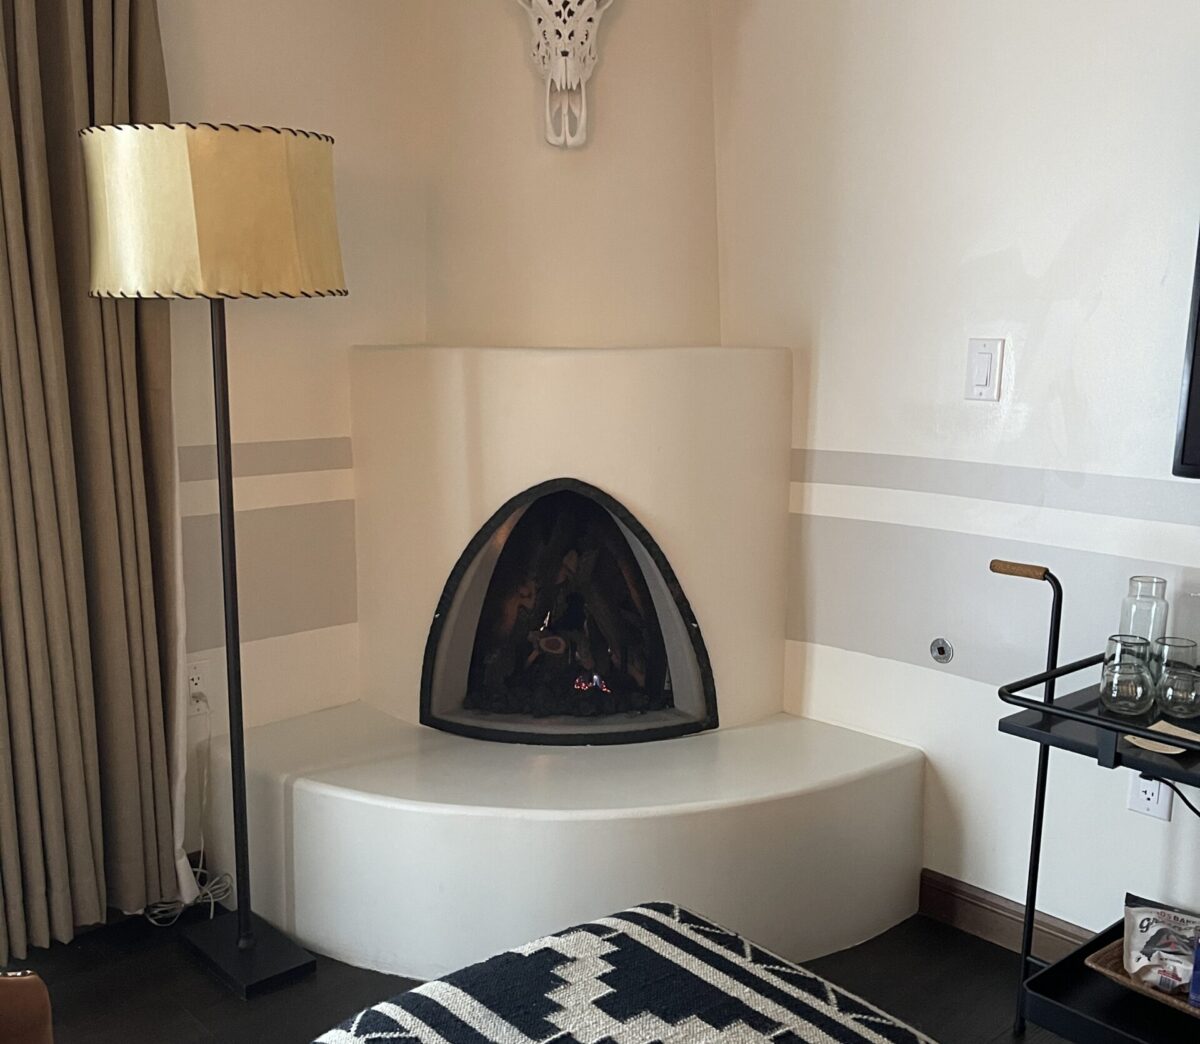 Fireplace in a room at Bishop's Lodge Hotel in Santa Fe, New Mexico.